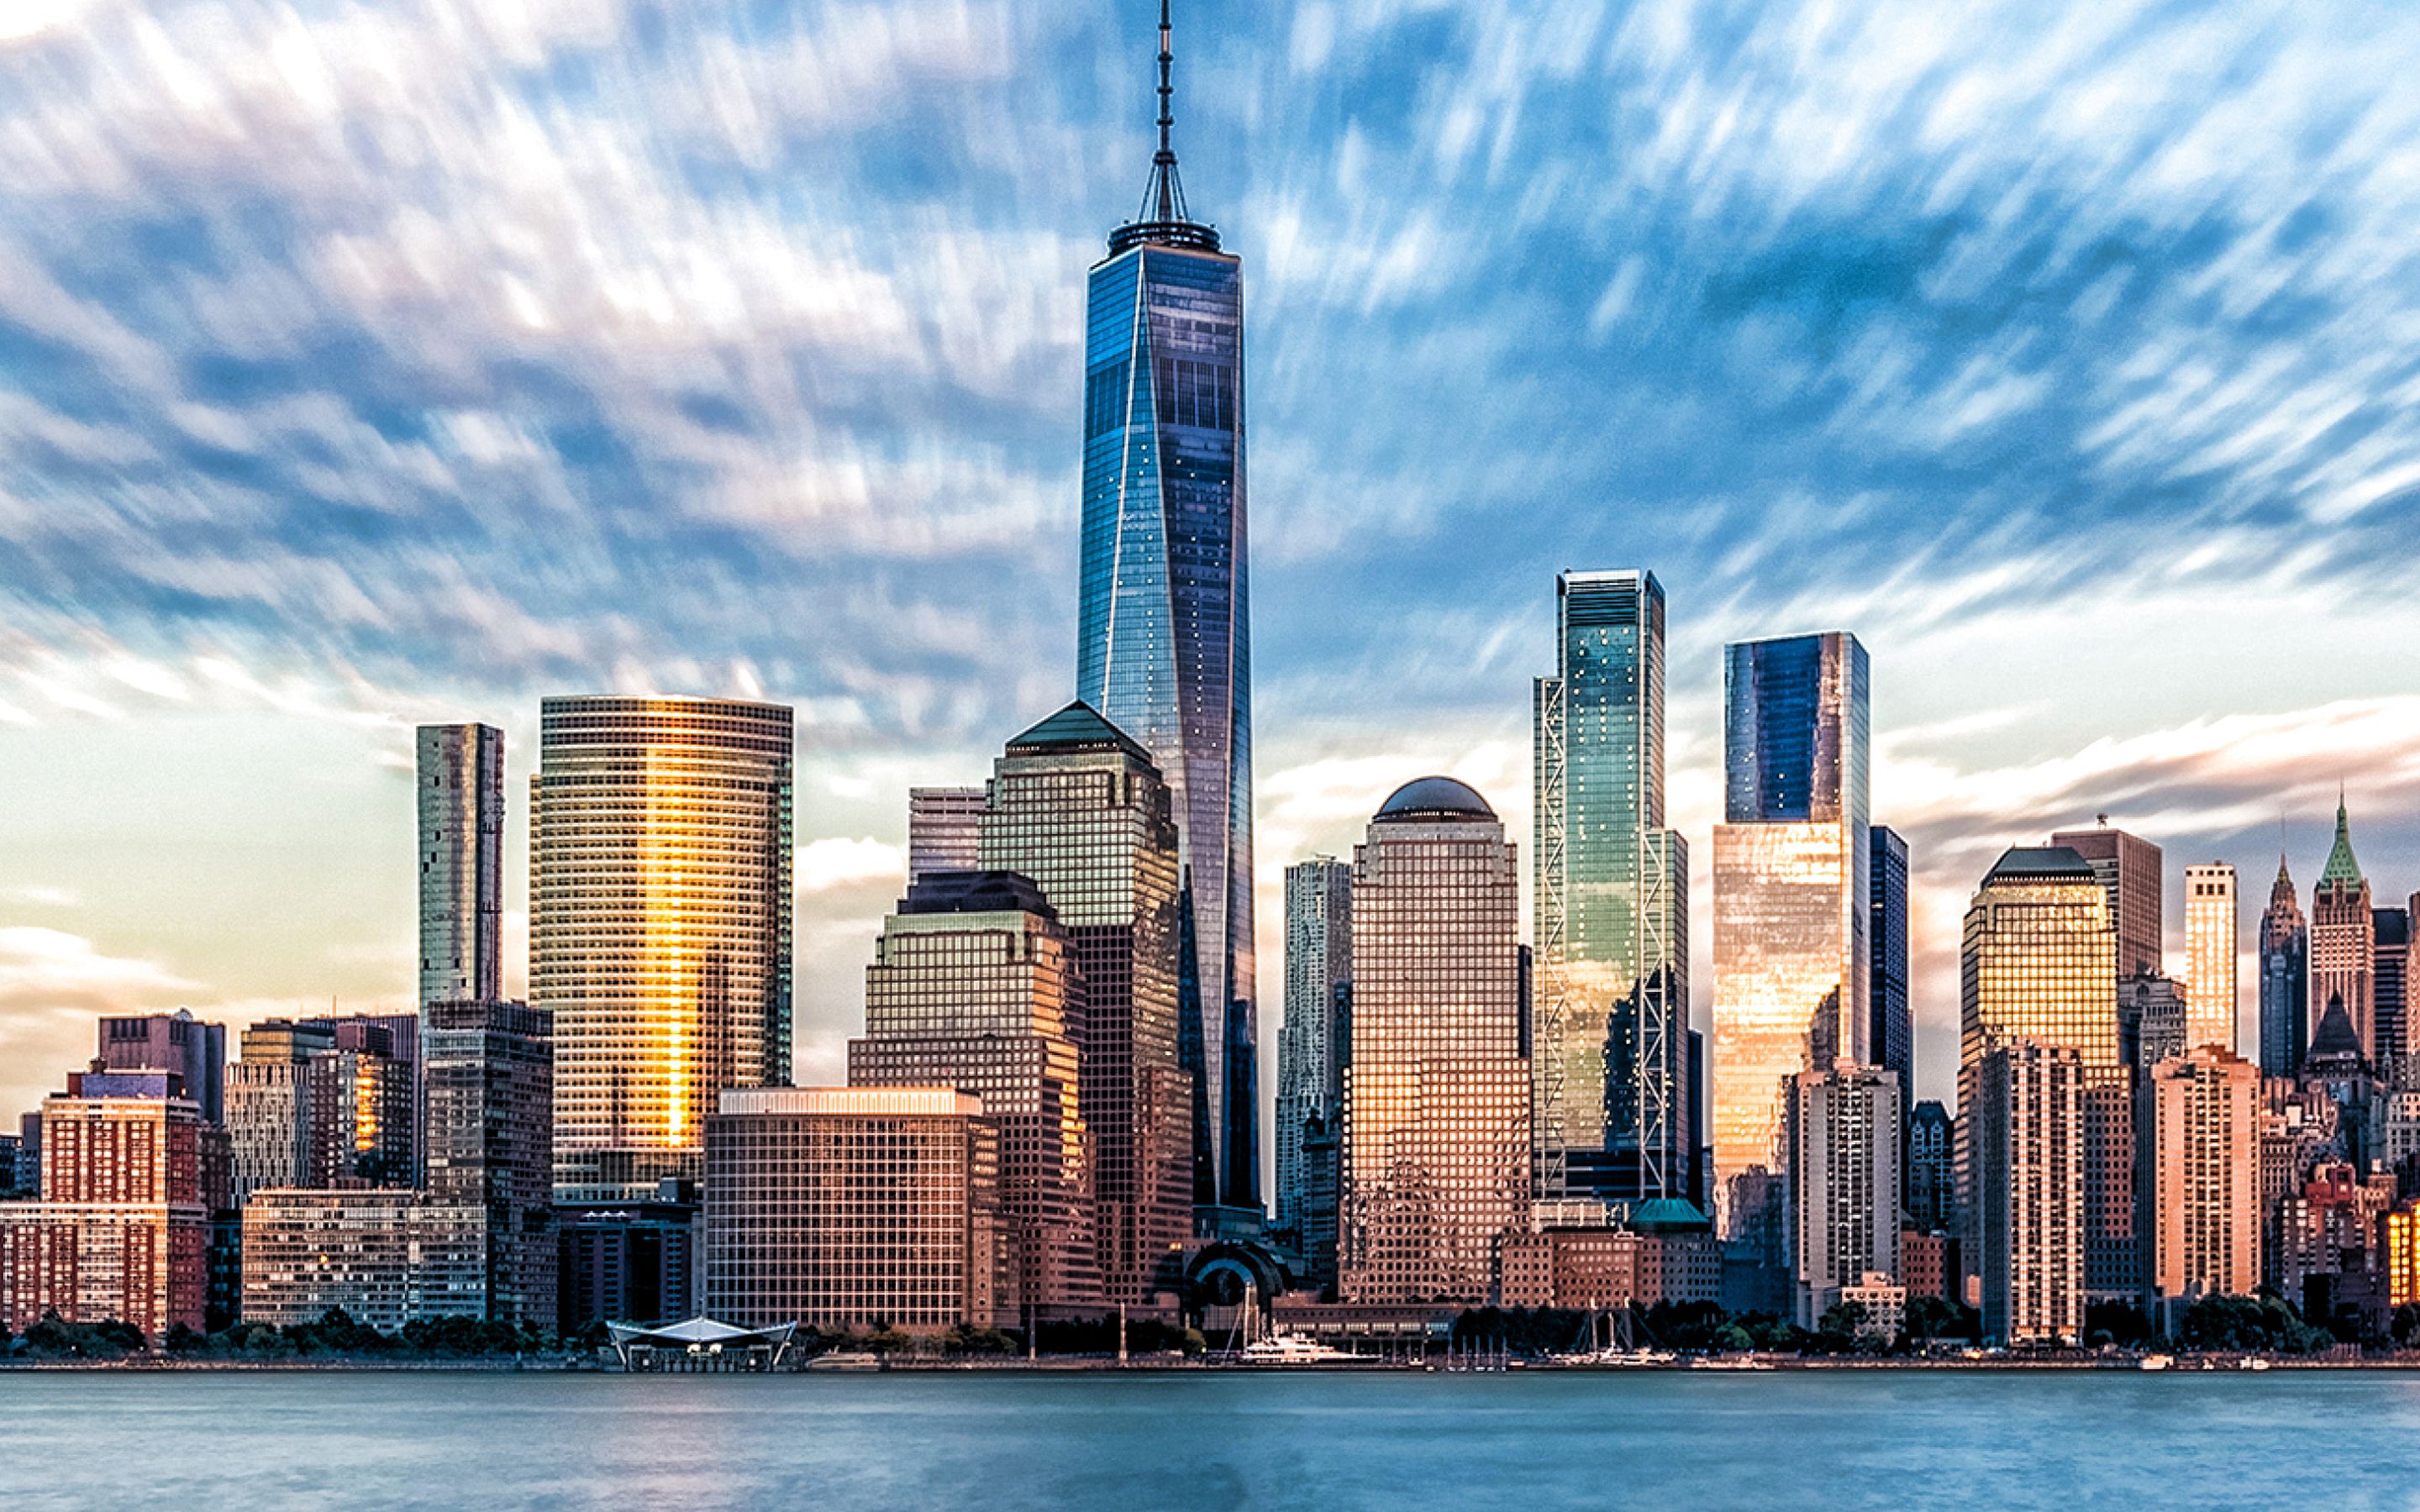 Download wallpaper One World Trade Center, One WTC, Freedom Tower, Manhattan, New York City, skyscrapers, panorama, New York skyline, New York cityscape, NYC, USA for desktop with resolution 2880x1800. High Quality HD